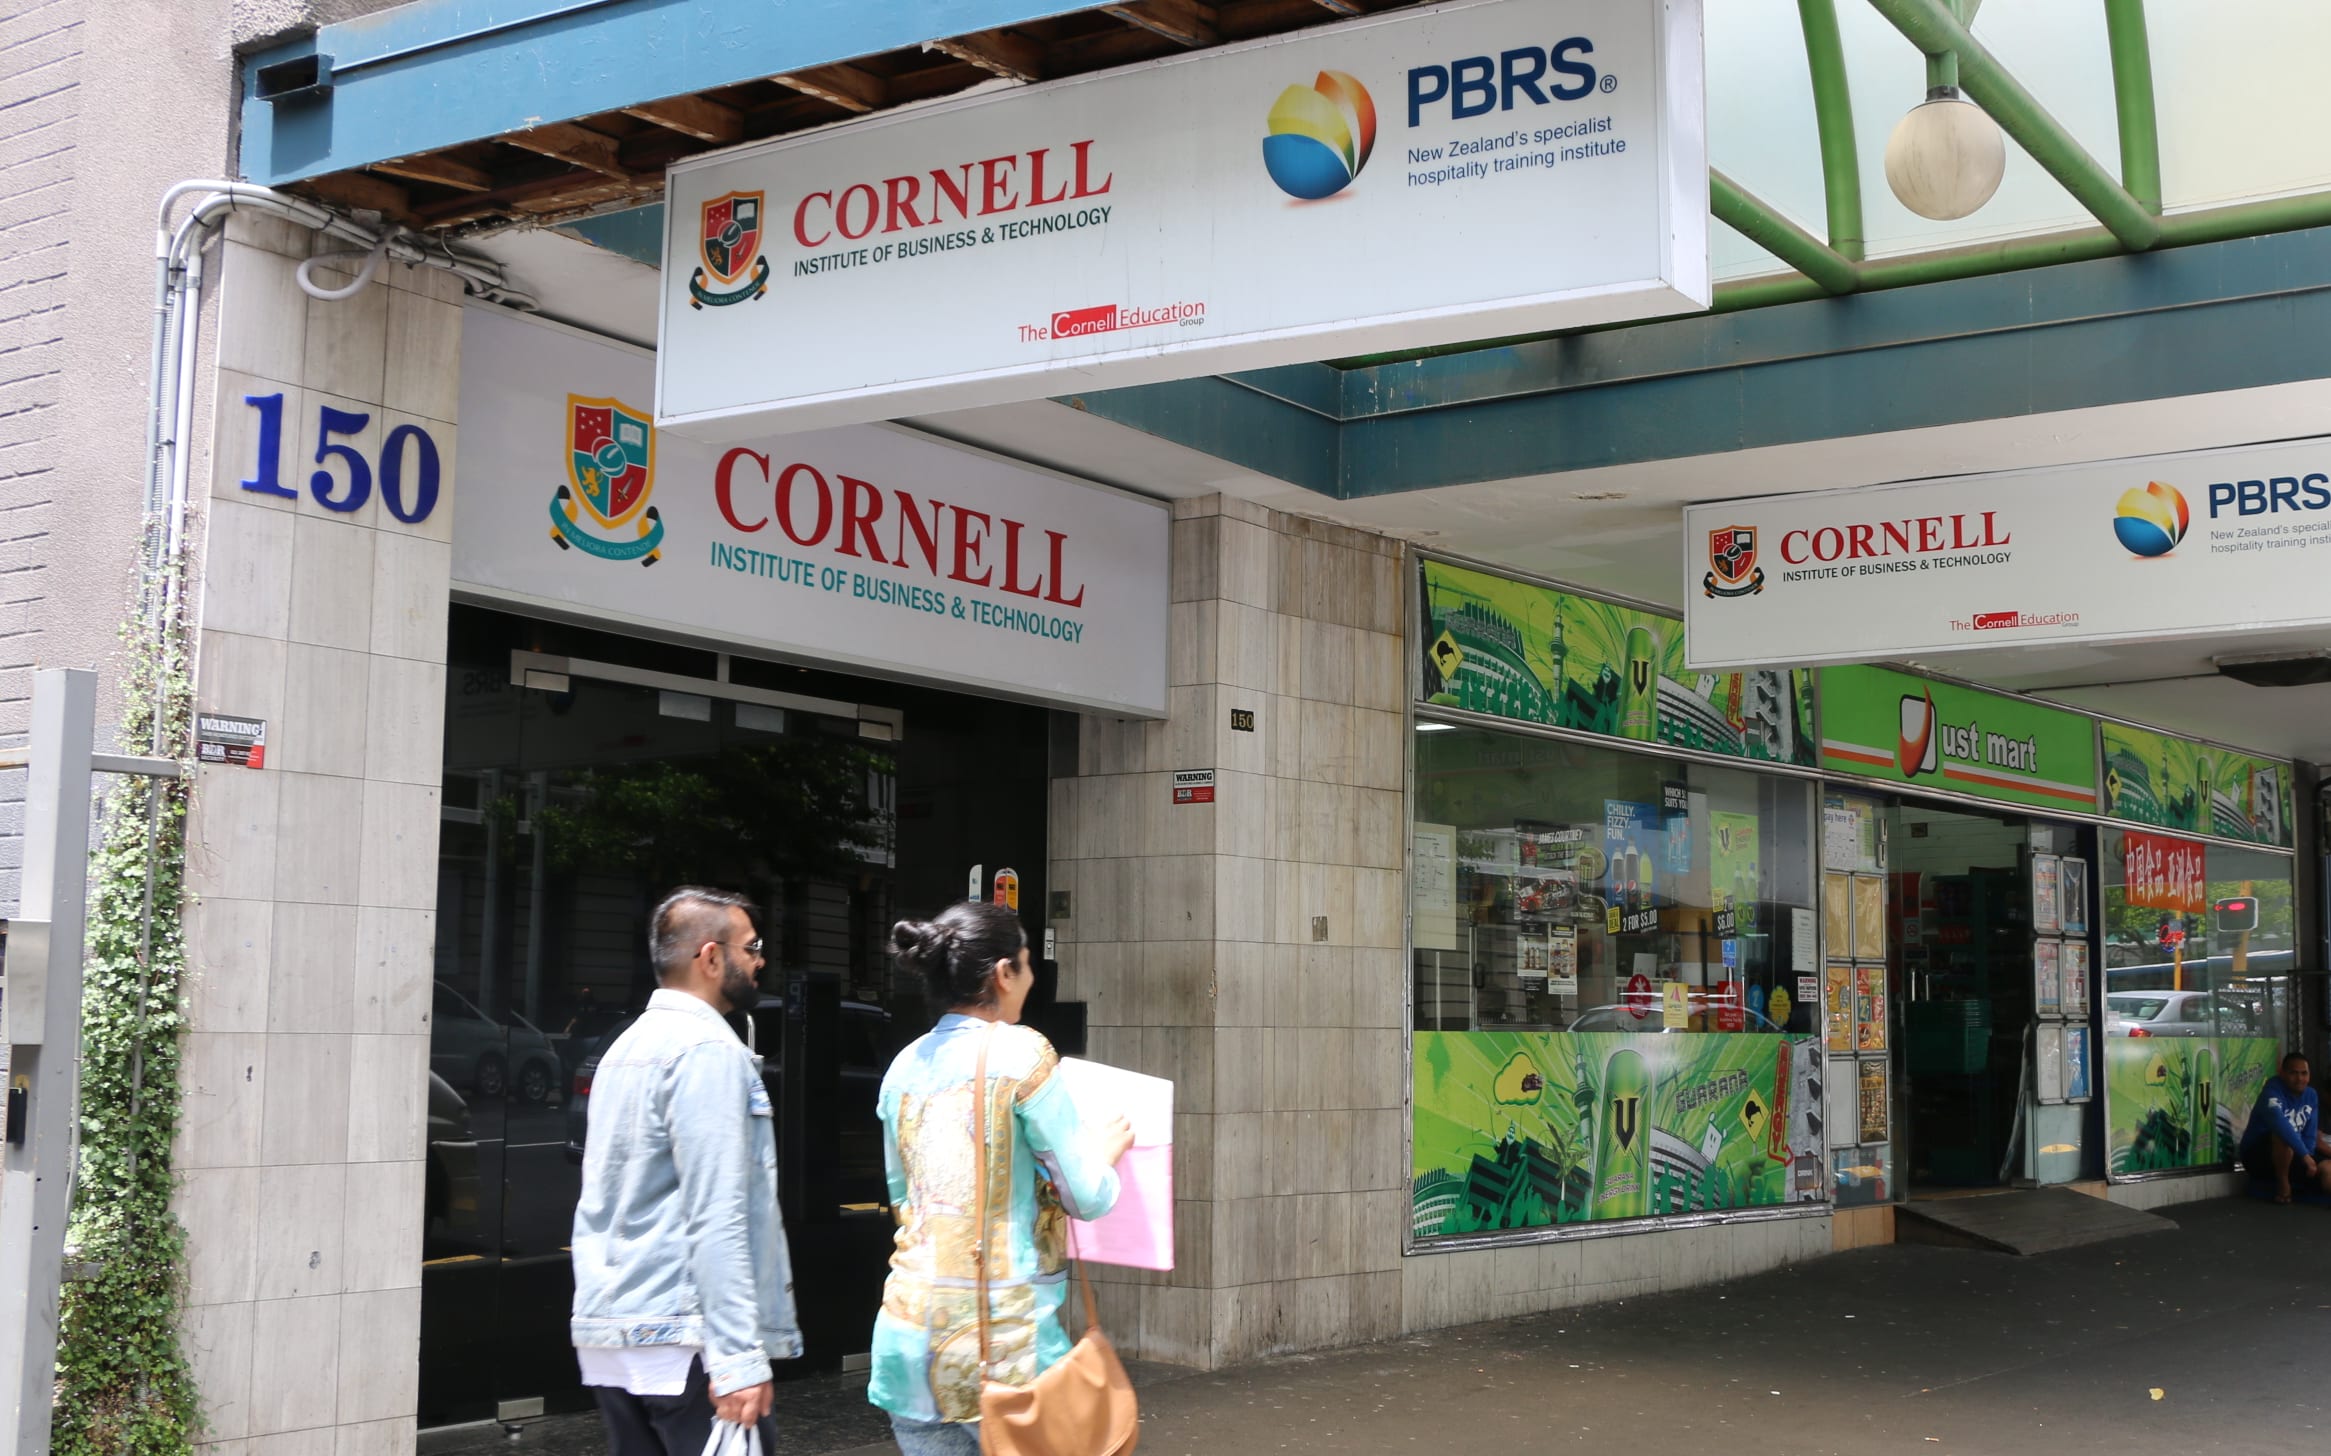 Cornell Institute of Business and Technology, Hobson Street, Auckland.